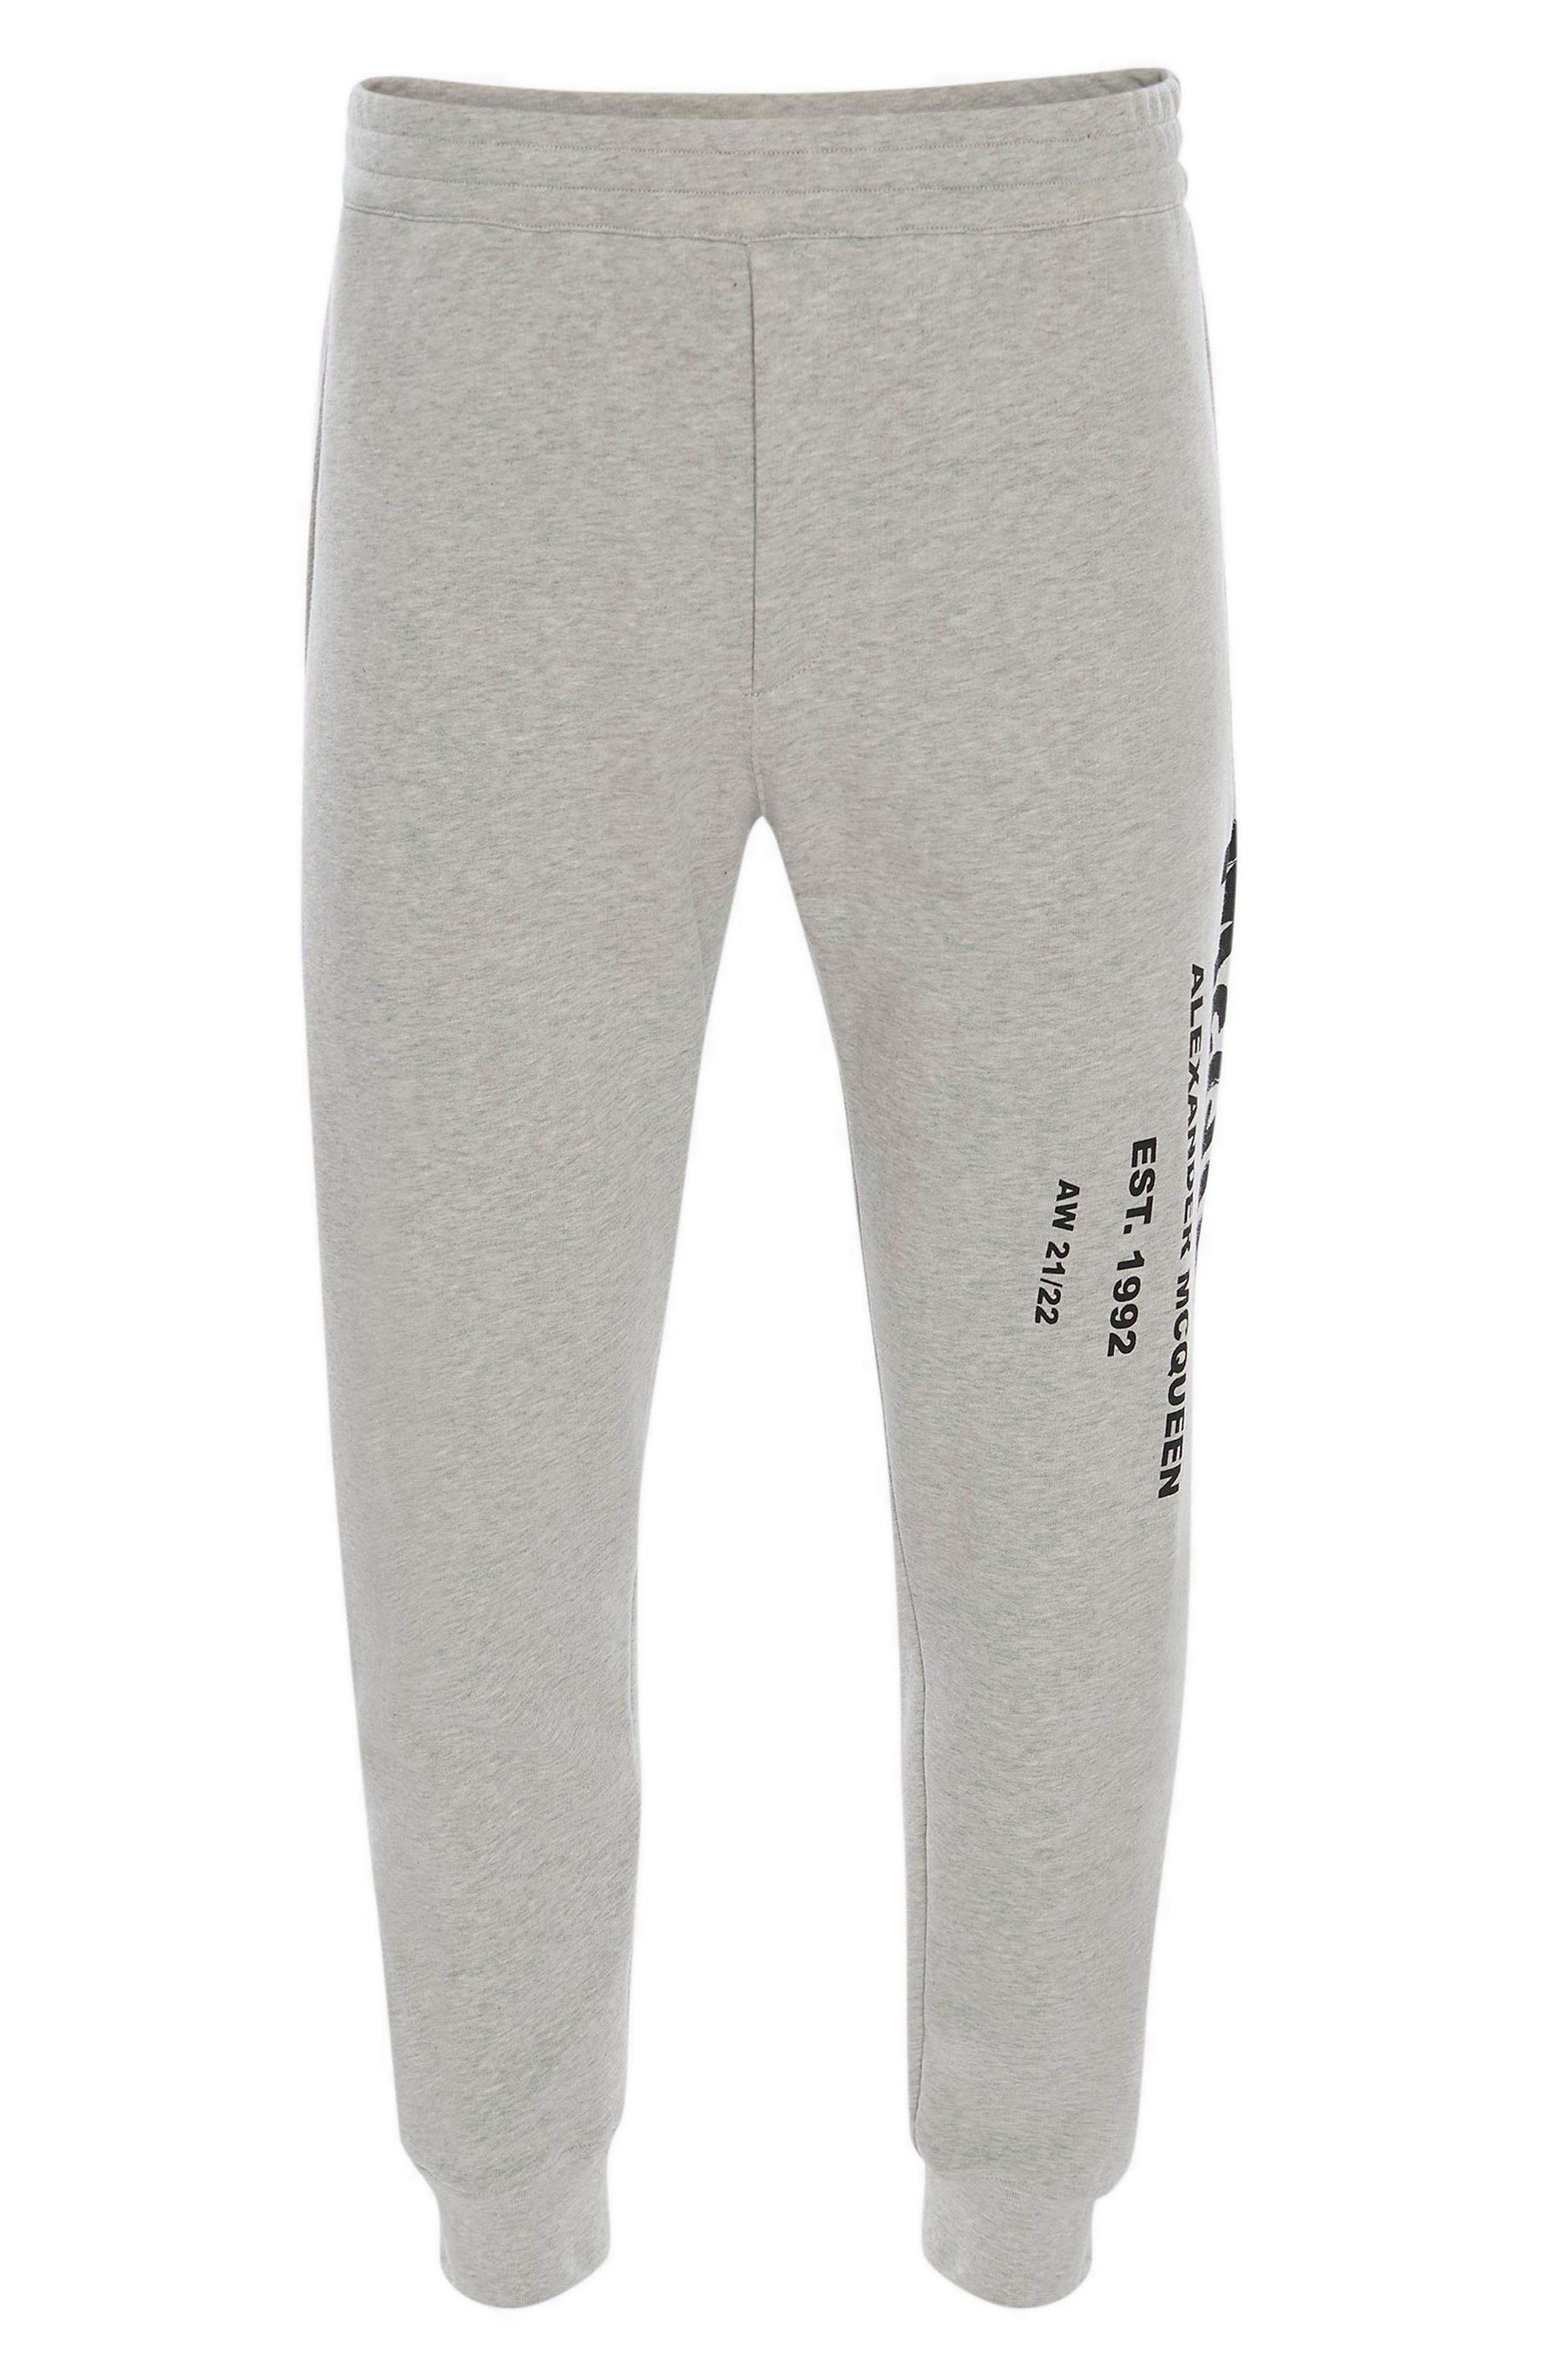 Alexander McQueen Graffiti Graphic Joggers in Pale Grey/Black at Nordstrom, Size Large